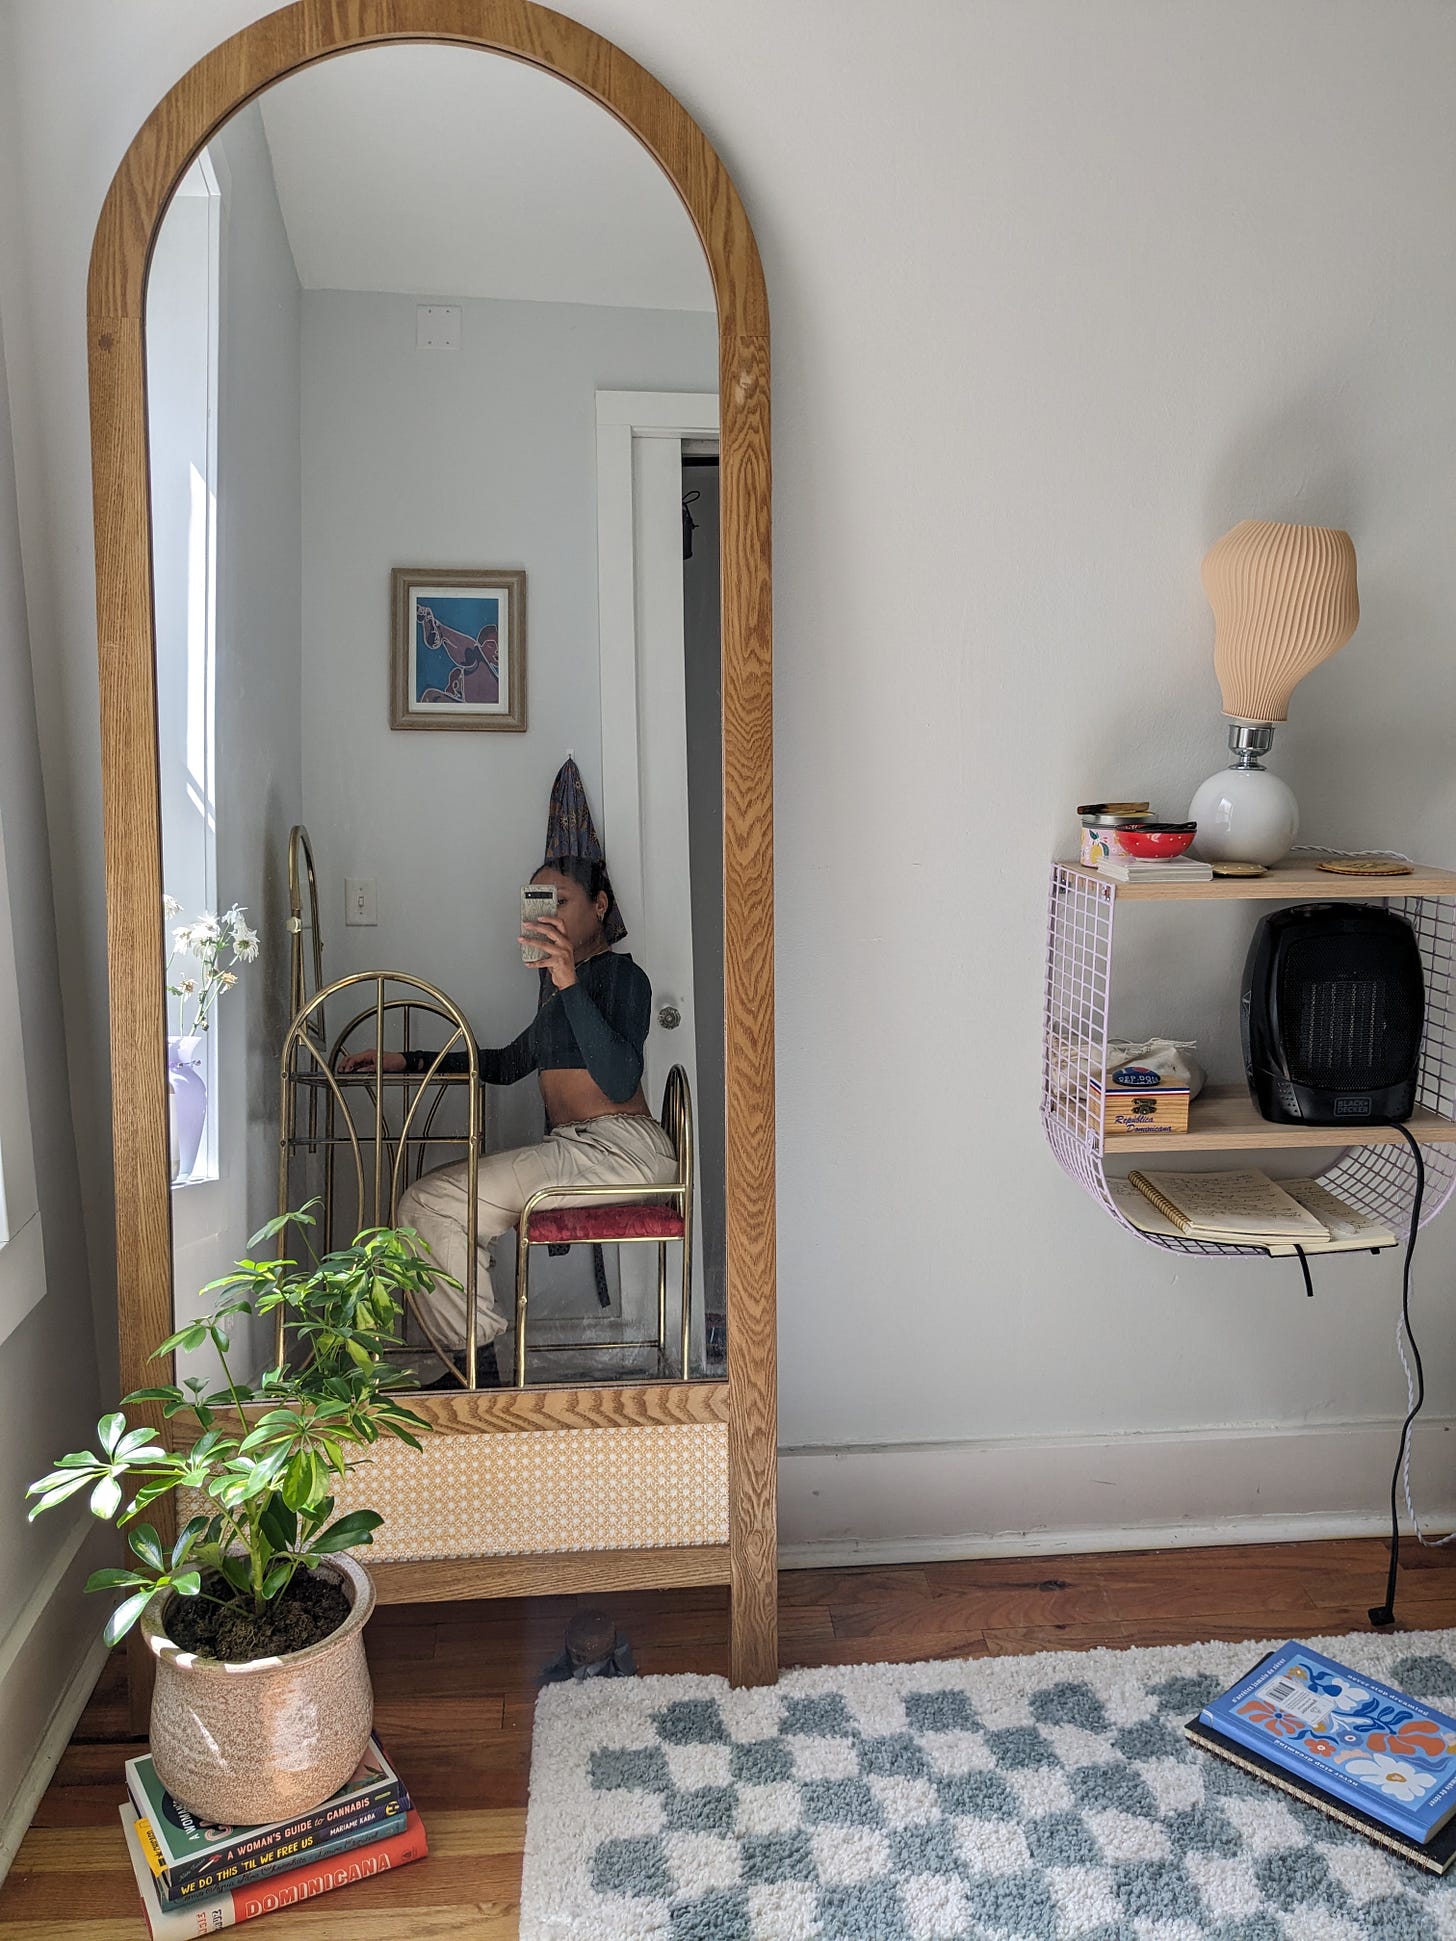 Nathalie sits by her gold vanity. She takes a photo of herself towards her full length mirror across her bedroom. Her seafoam green and white checkered rug peeks through